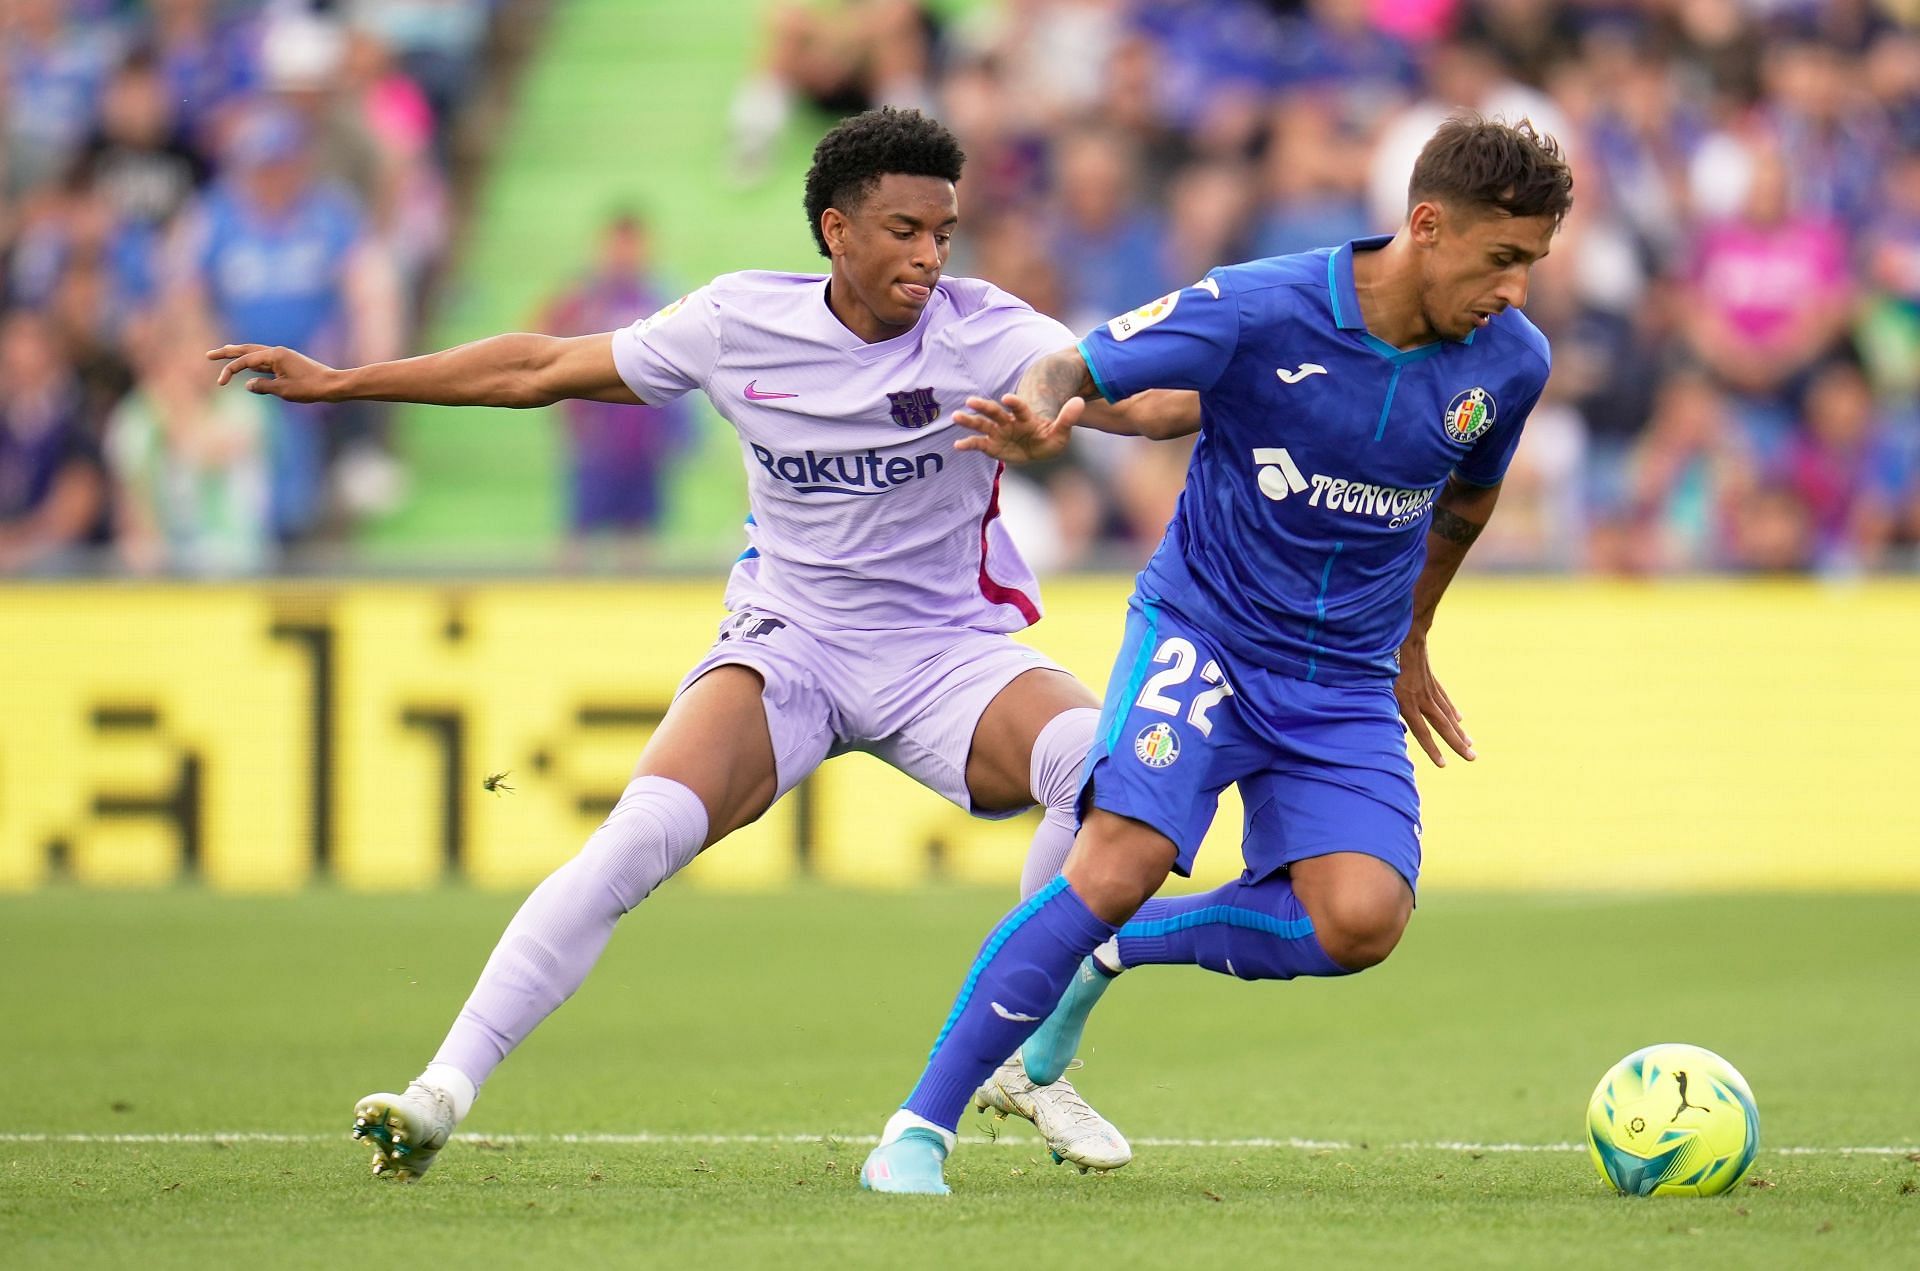 Getafe have a point to prove